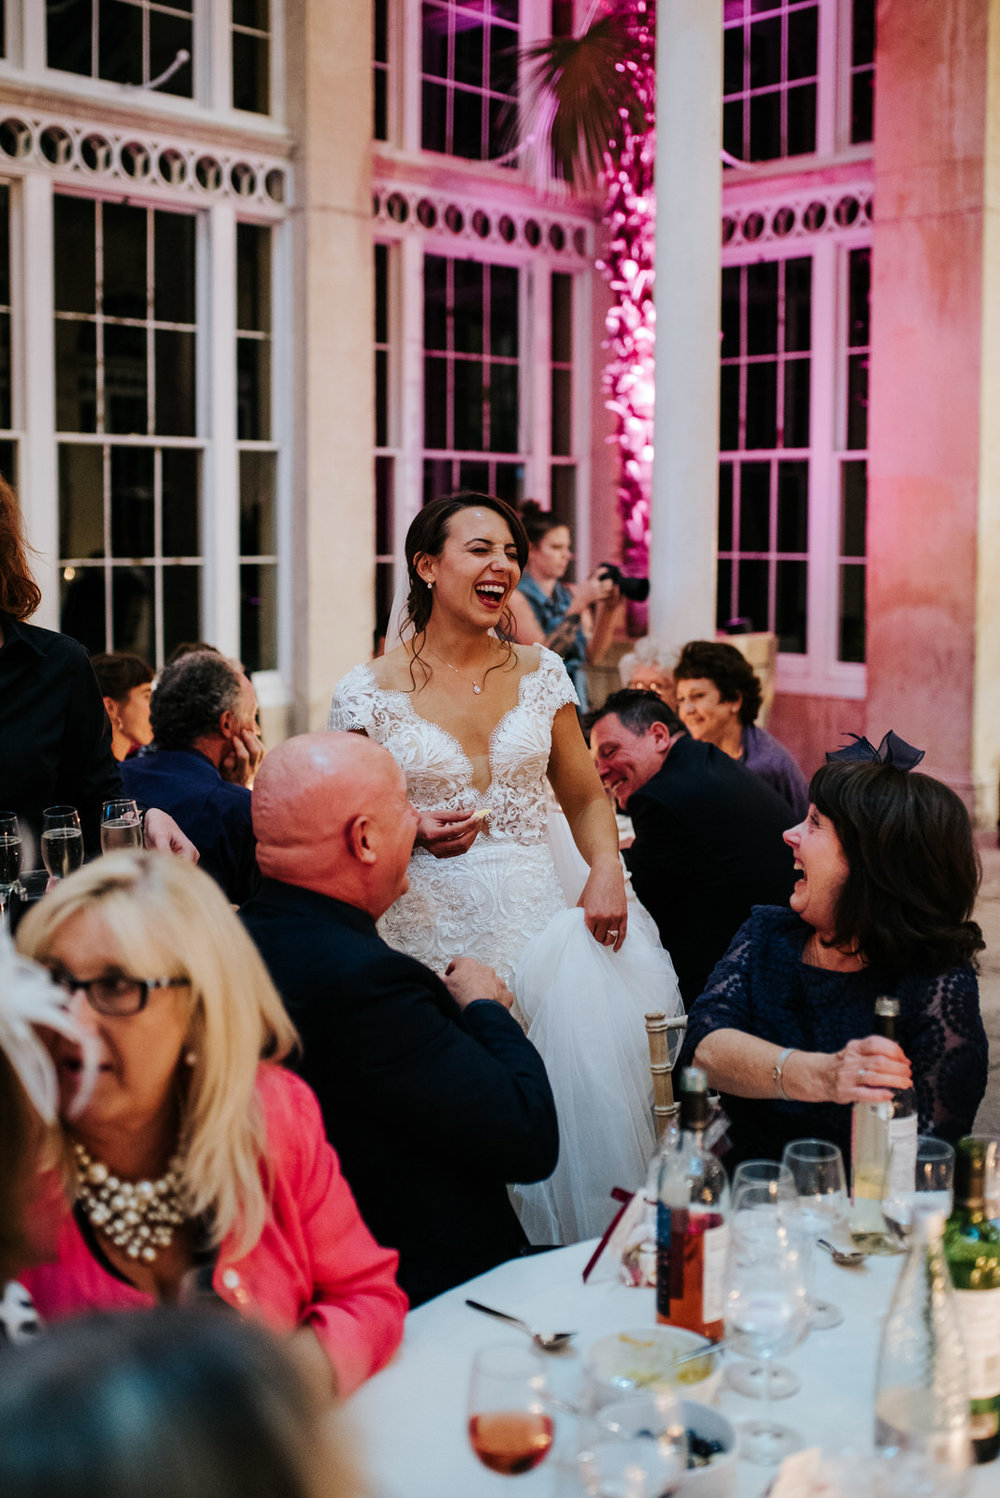 Bride can't contain laughter as she goes around tables saying hello to her guests